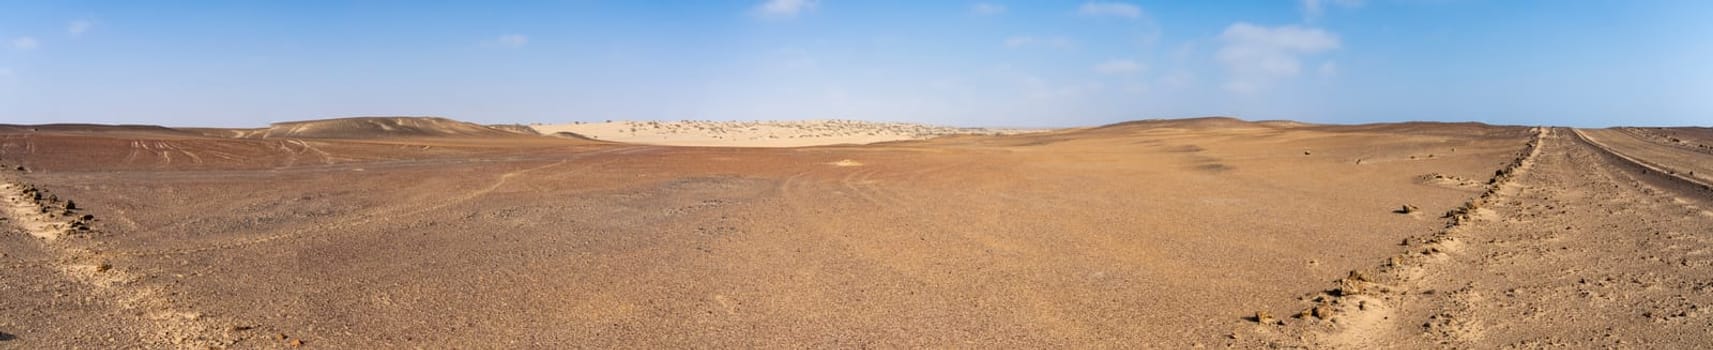 Panoramic view of the Skeleton Coast desert dunes in Namibia in Africa.